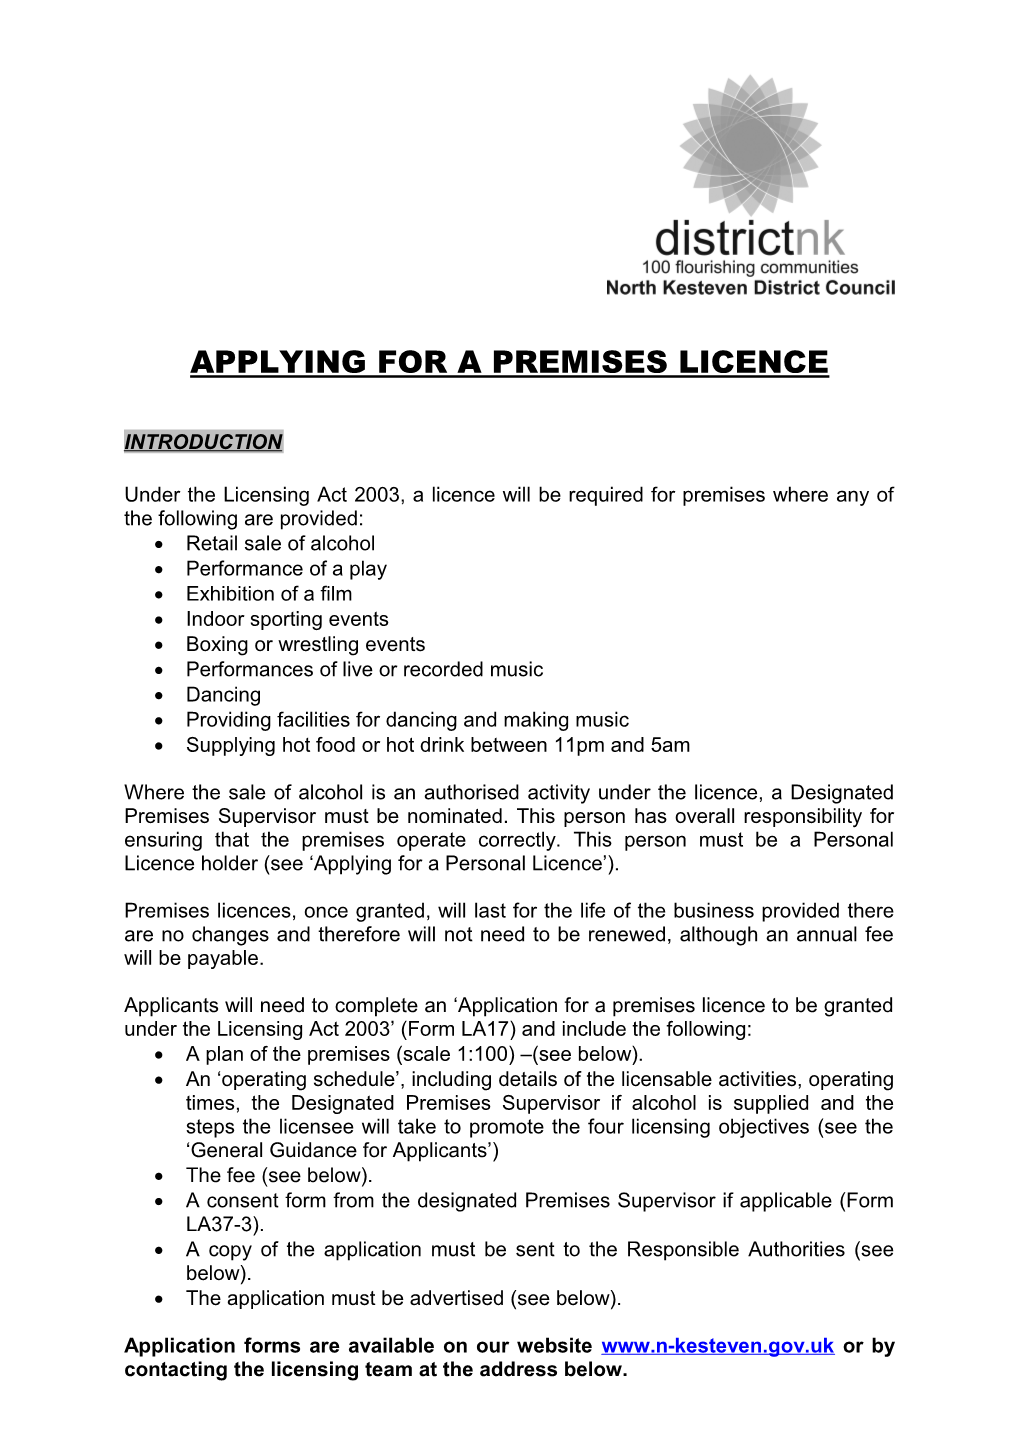 Applying for a Premises Licence